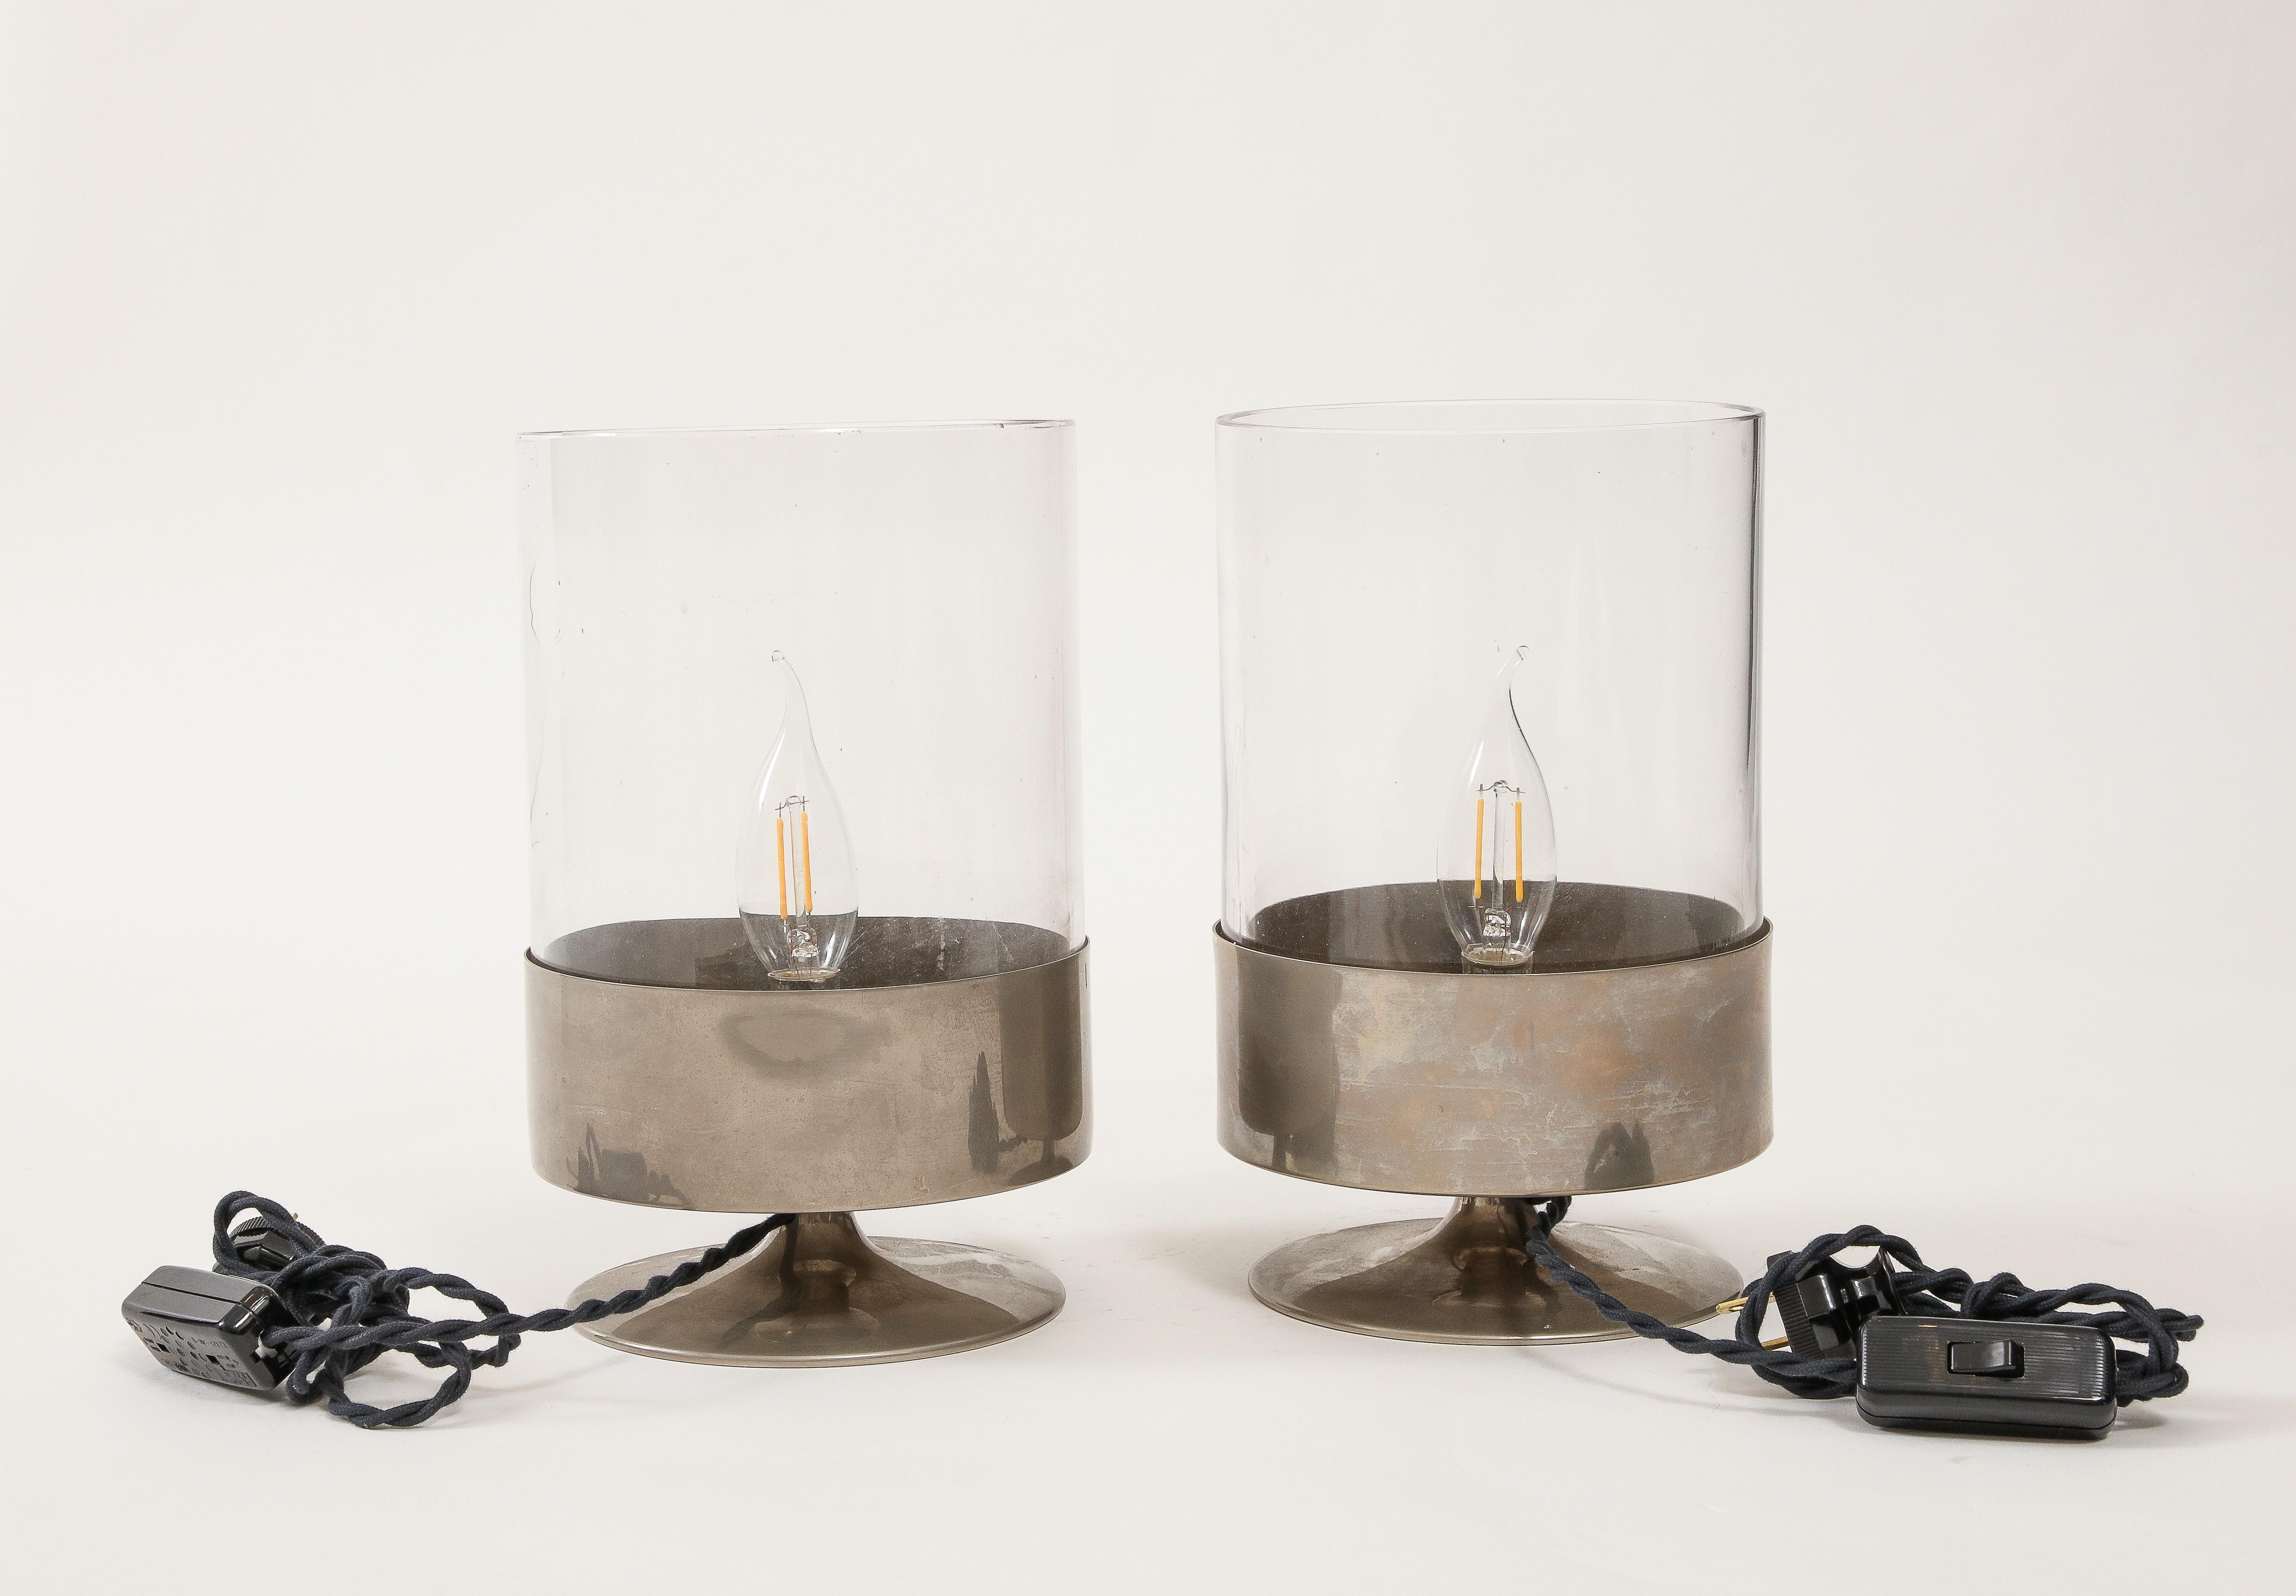 Rare set of Philippe Barbier signed photophores turned into table lamps. The lamps feature a nickel plated brass 